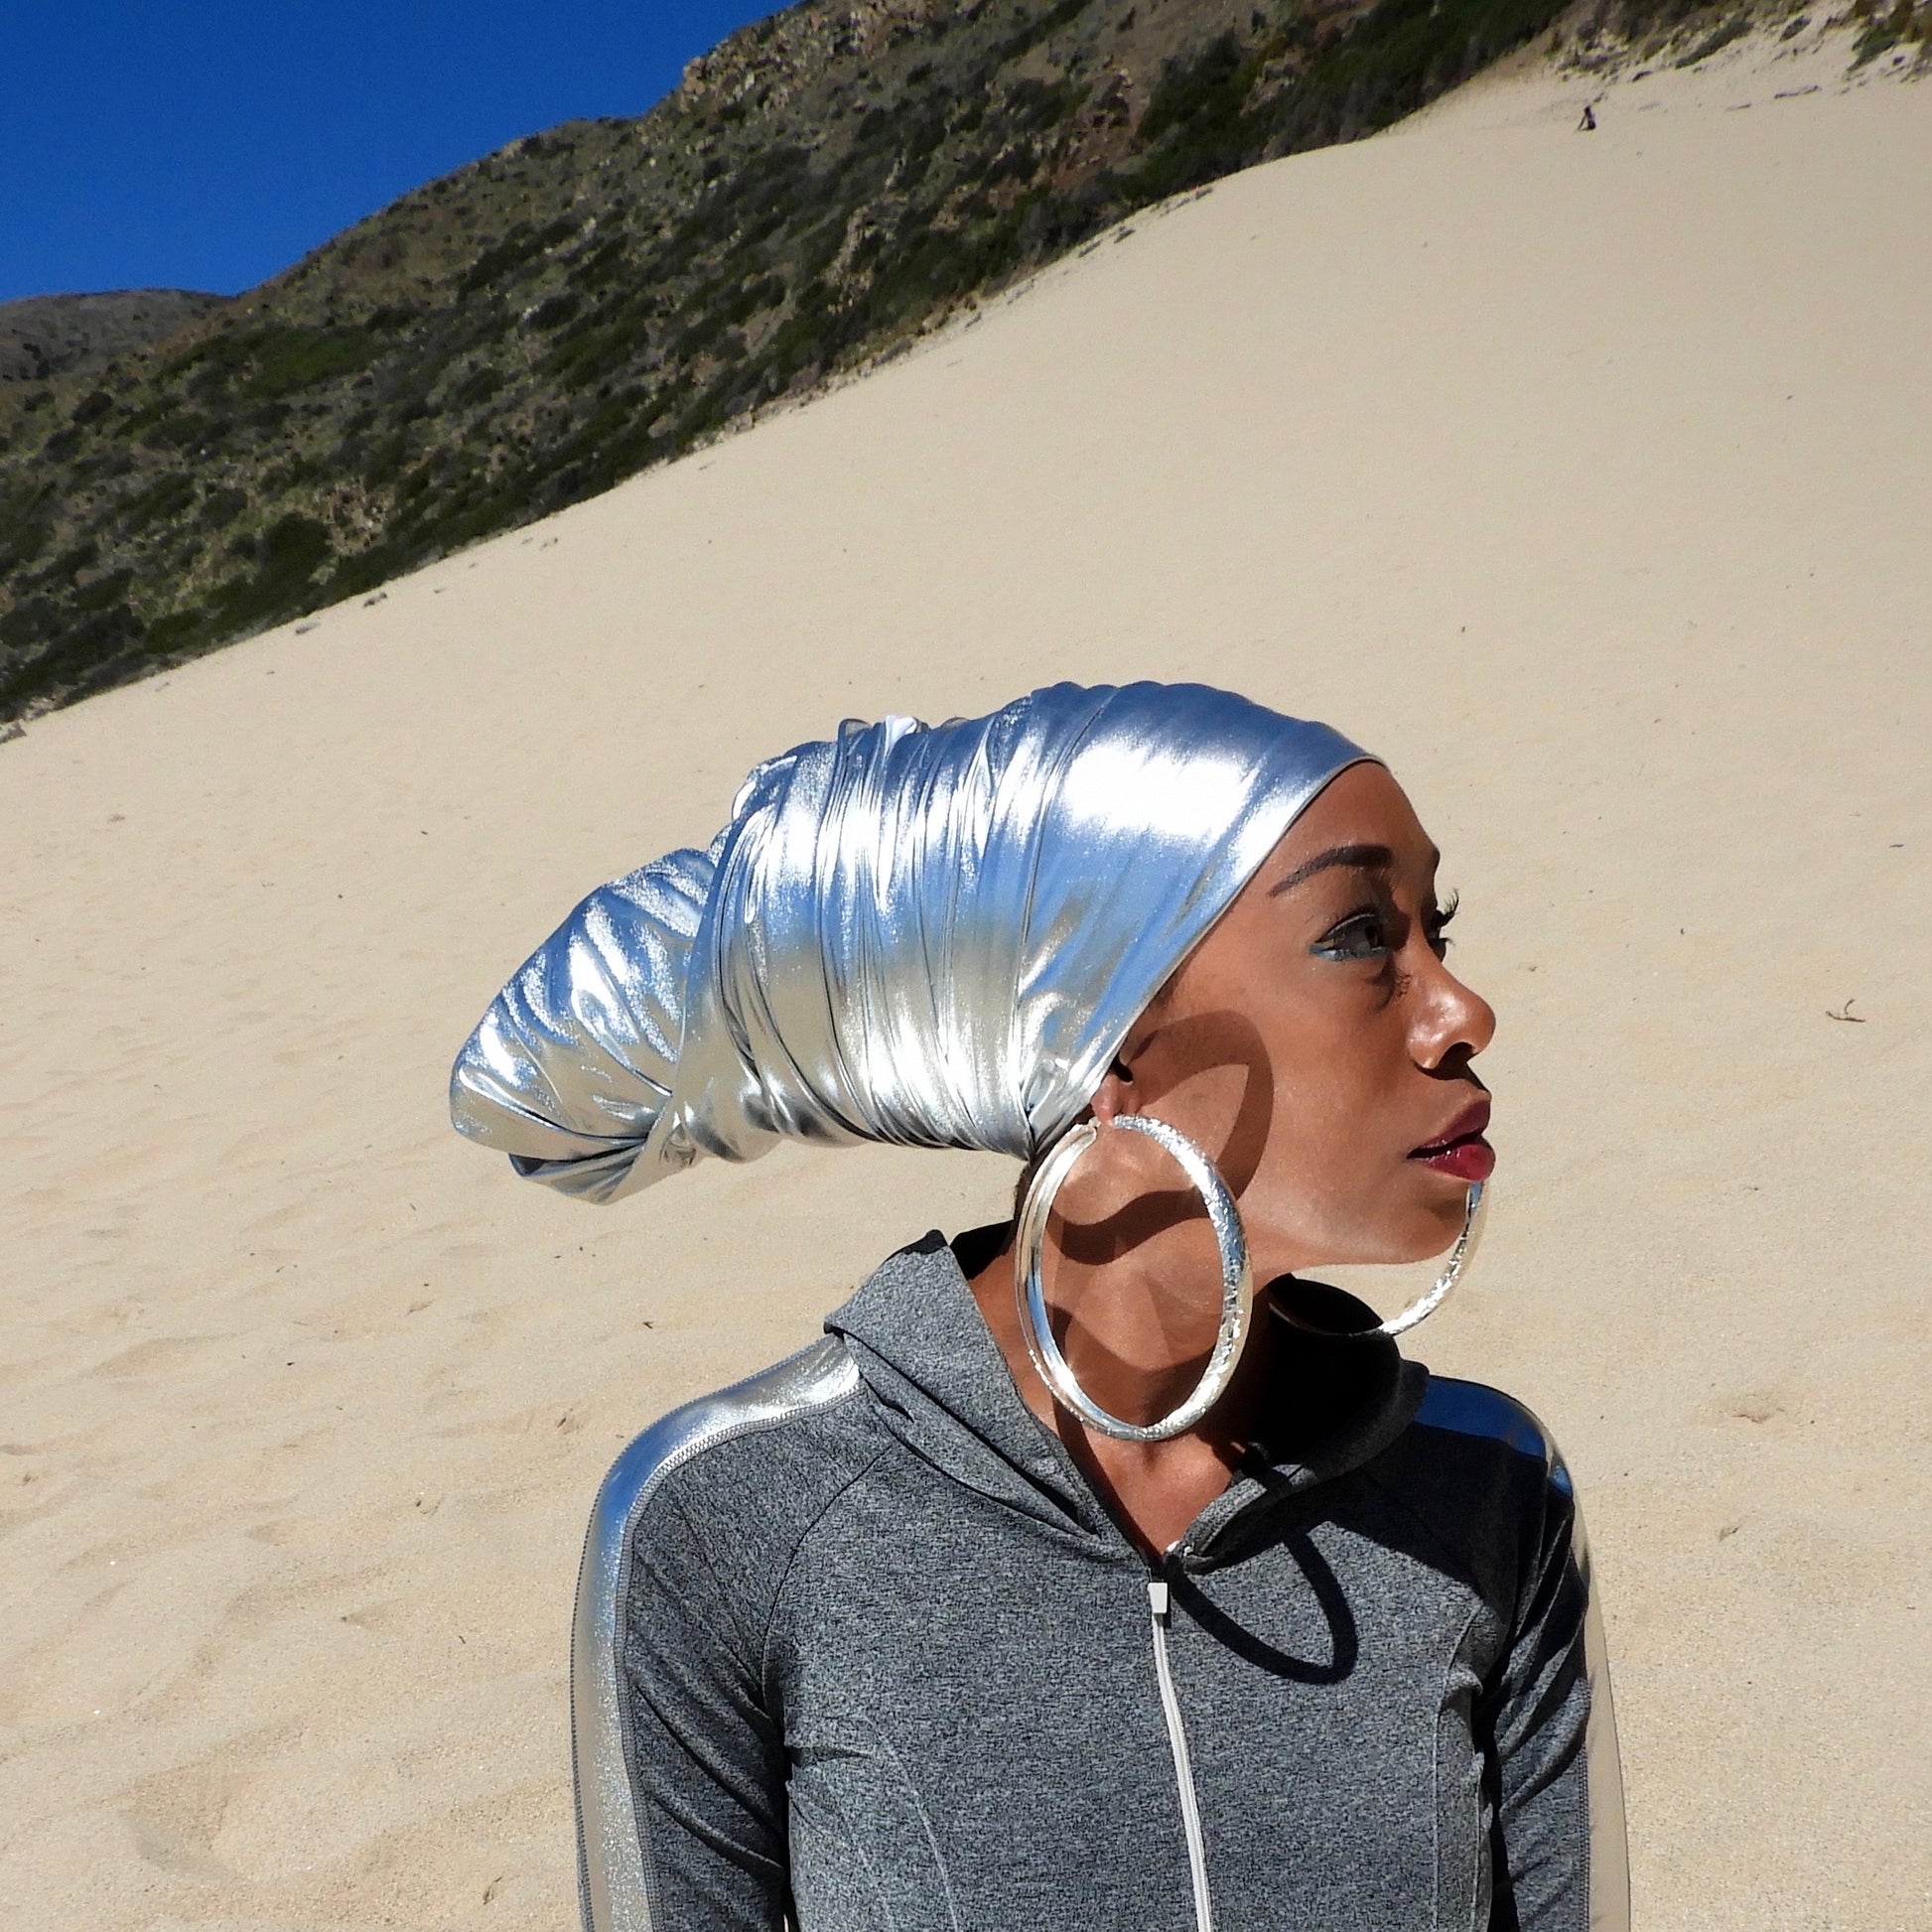 model wearing stretchy metallic silver head wrap in the sand. head wrap style in low cone style. model is sitting in sand with mountains in background